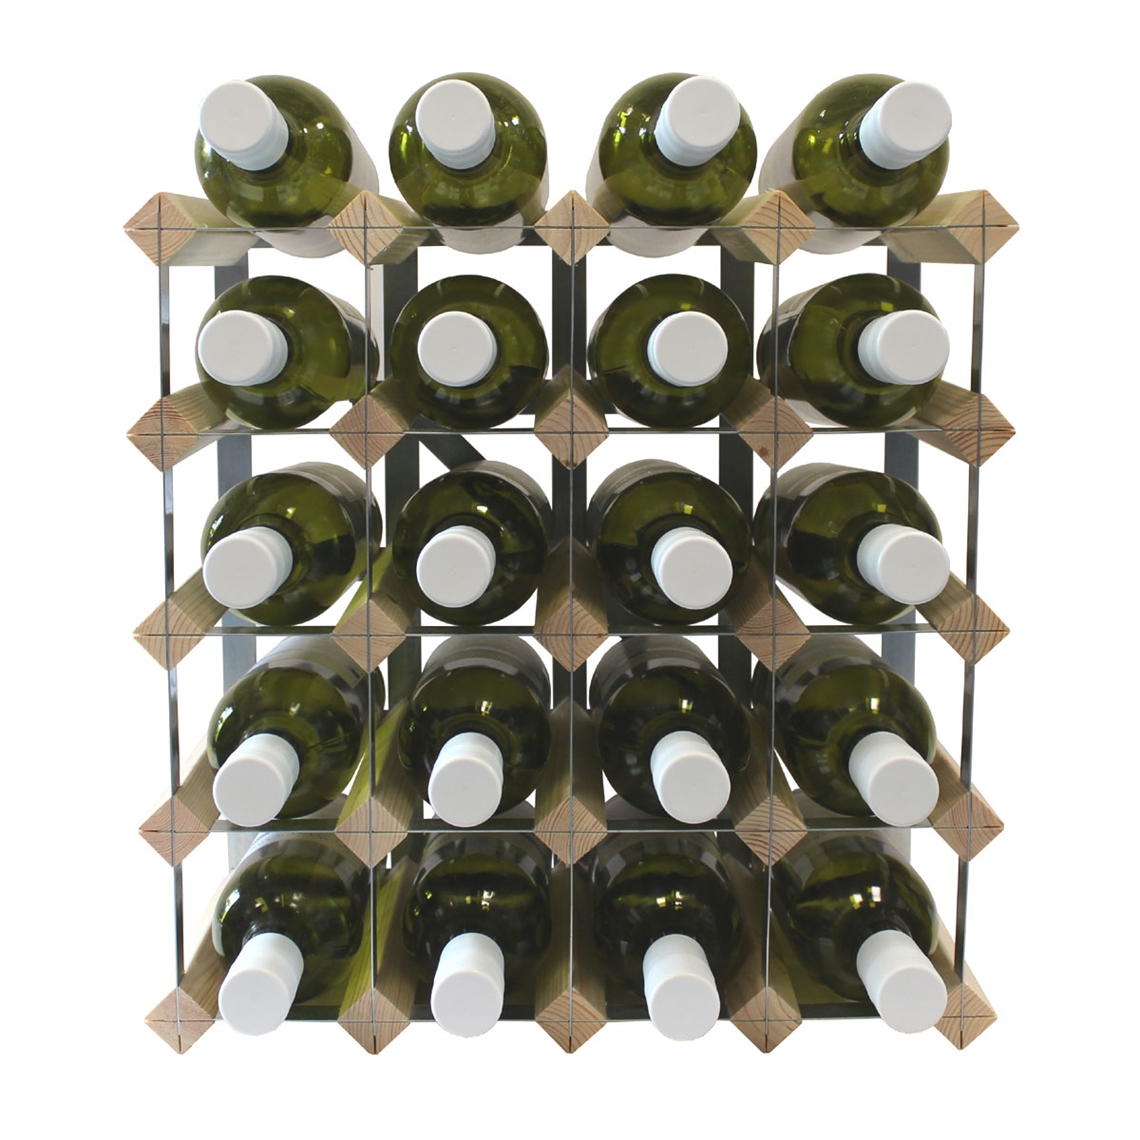 View more freestanding case & crate wine bin from our Assembled Wine Racks range